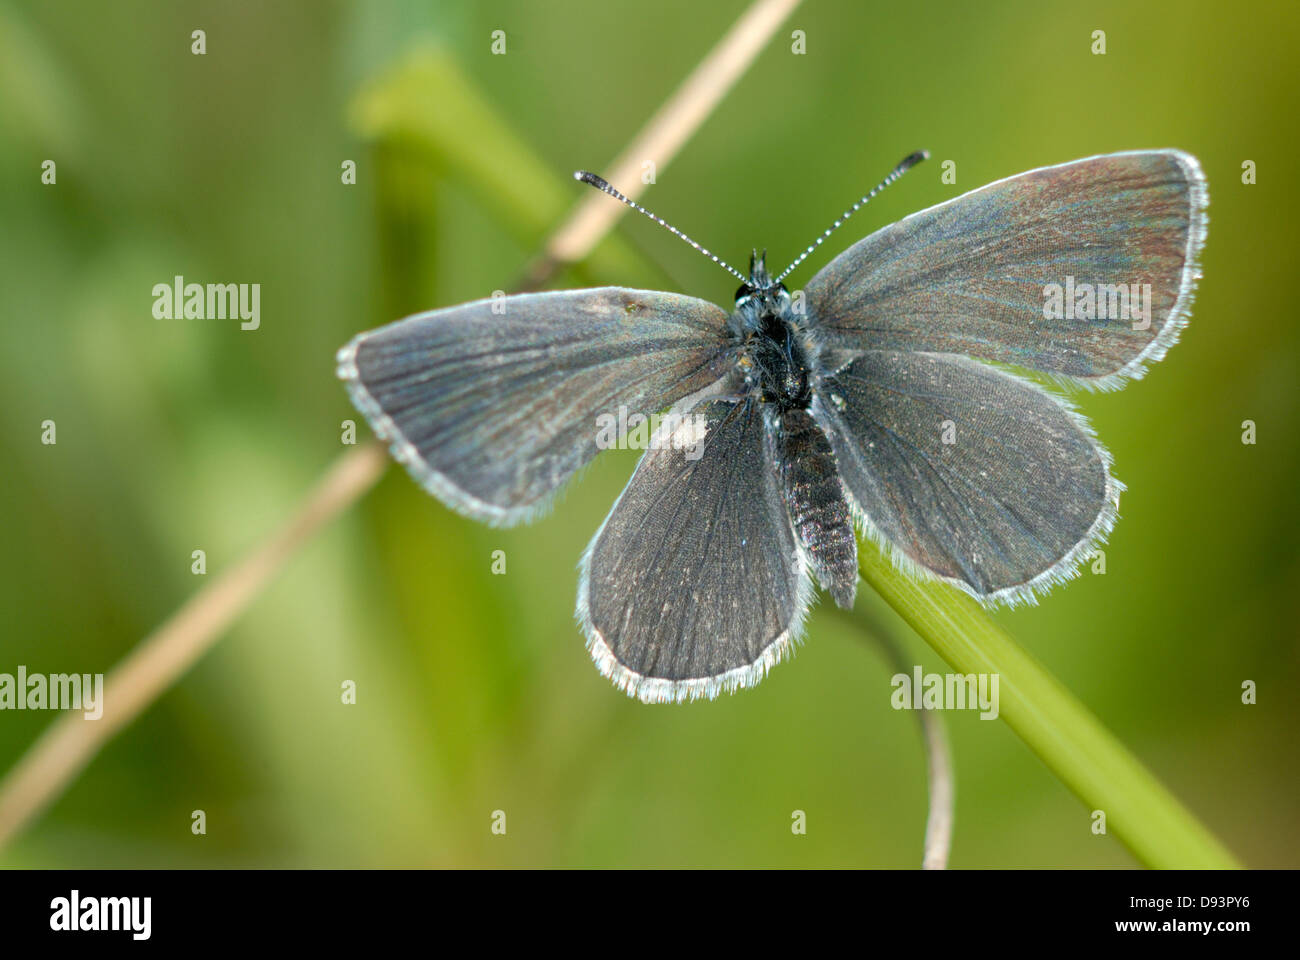 A small blue butterfly at rest Stock Photo